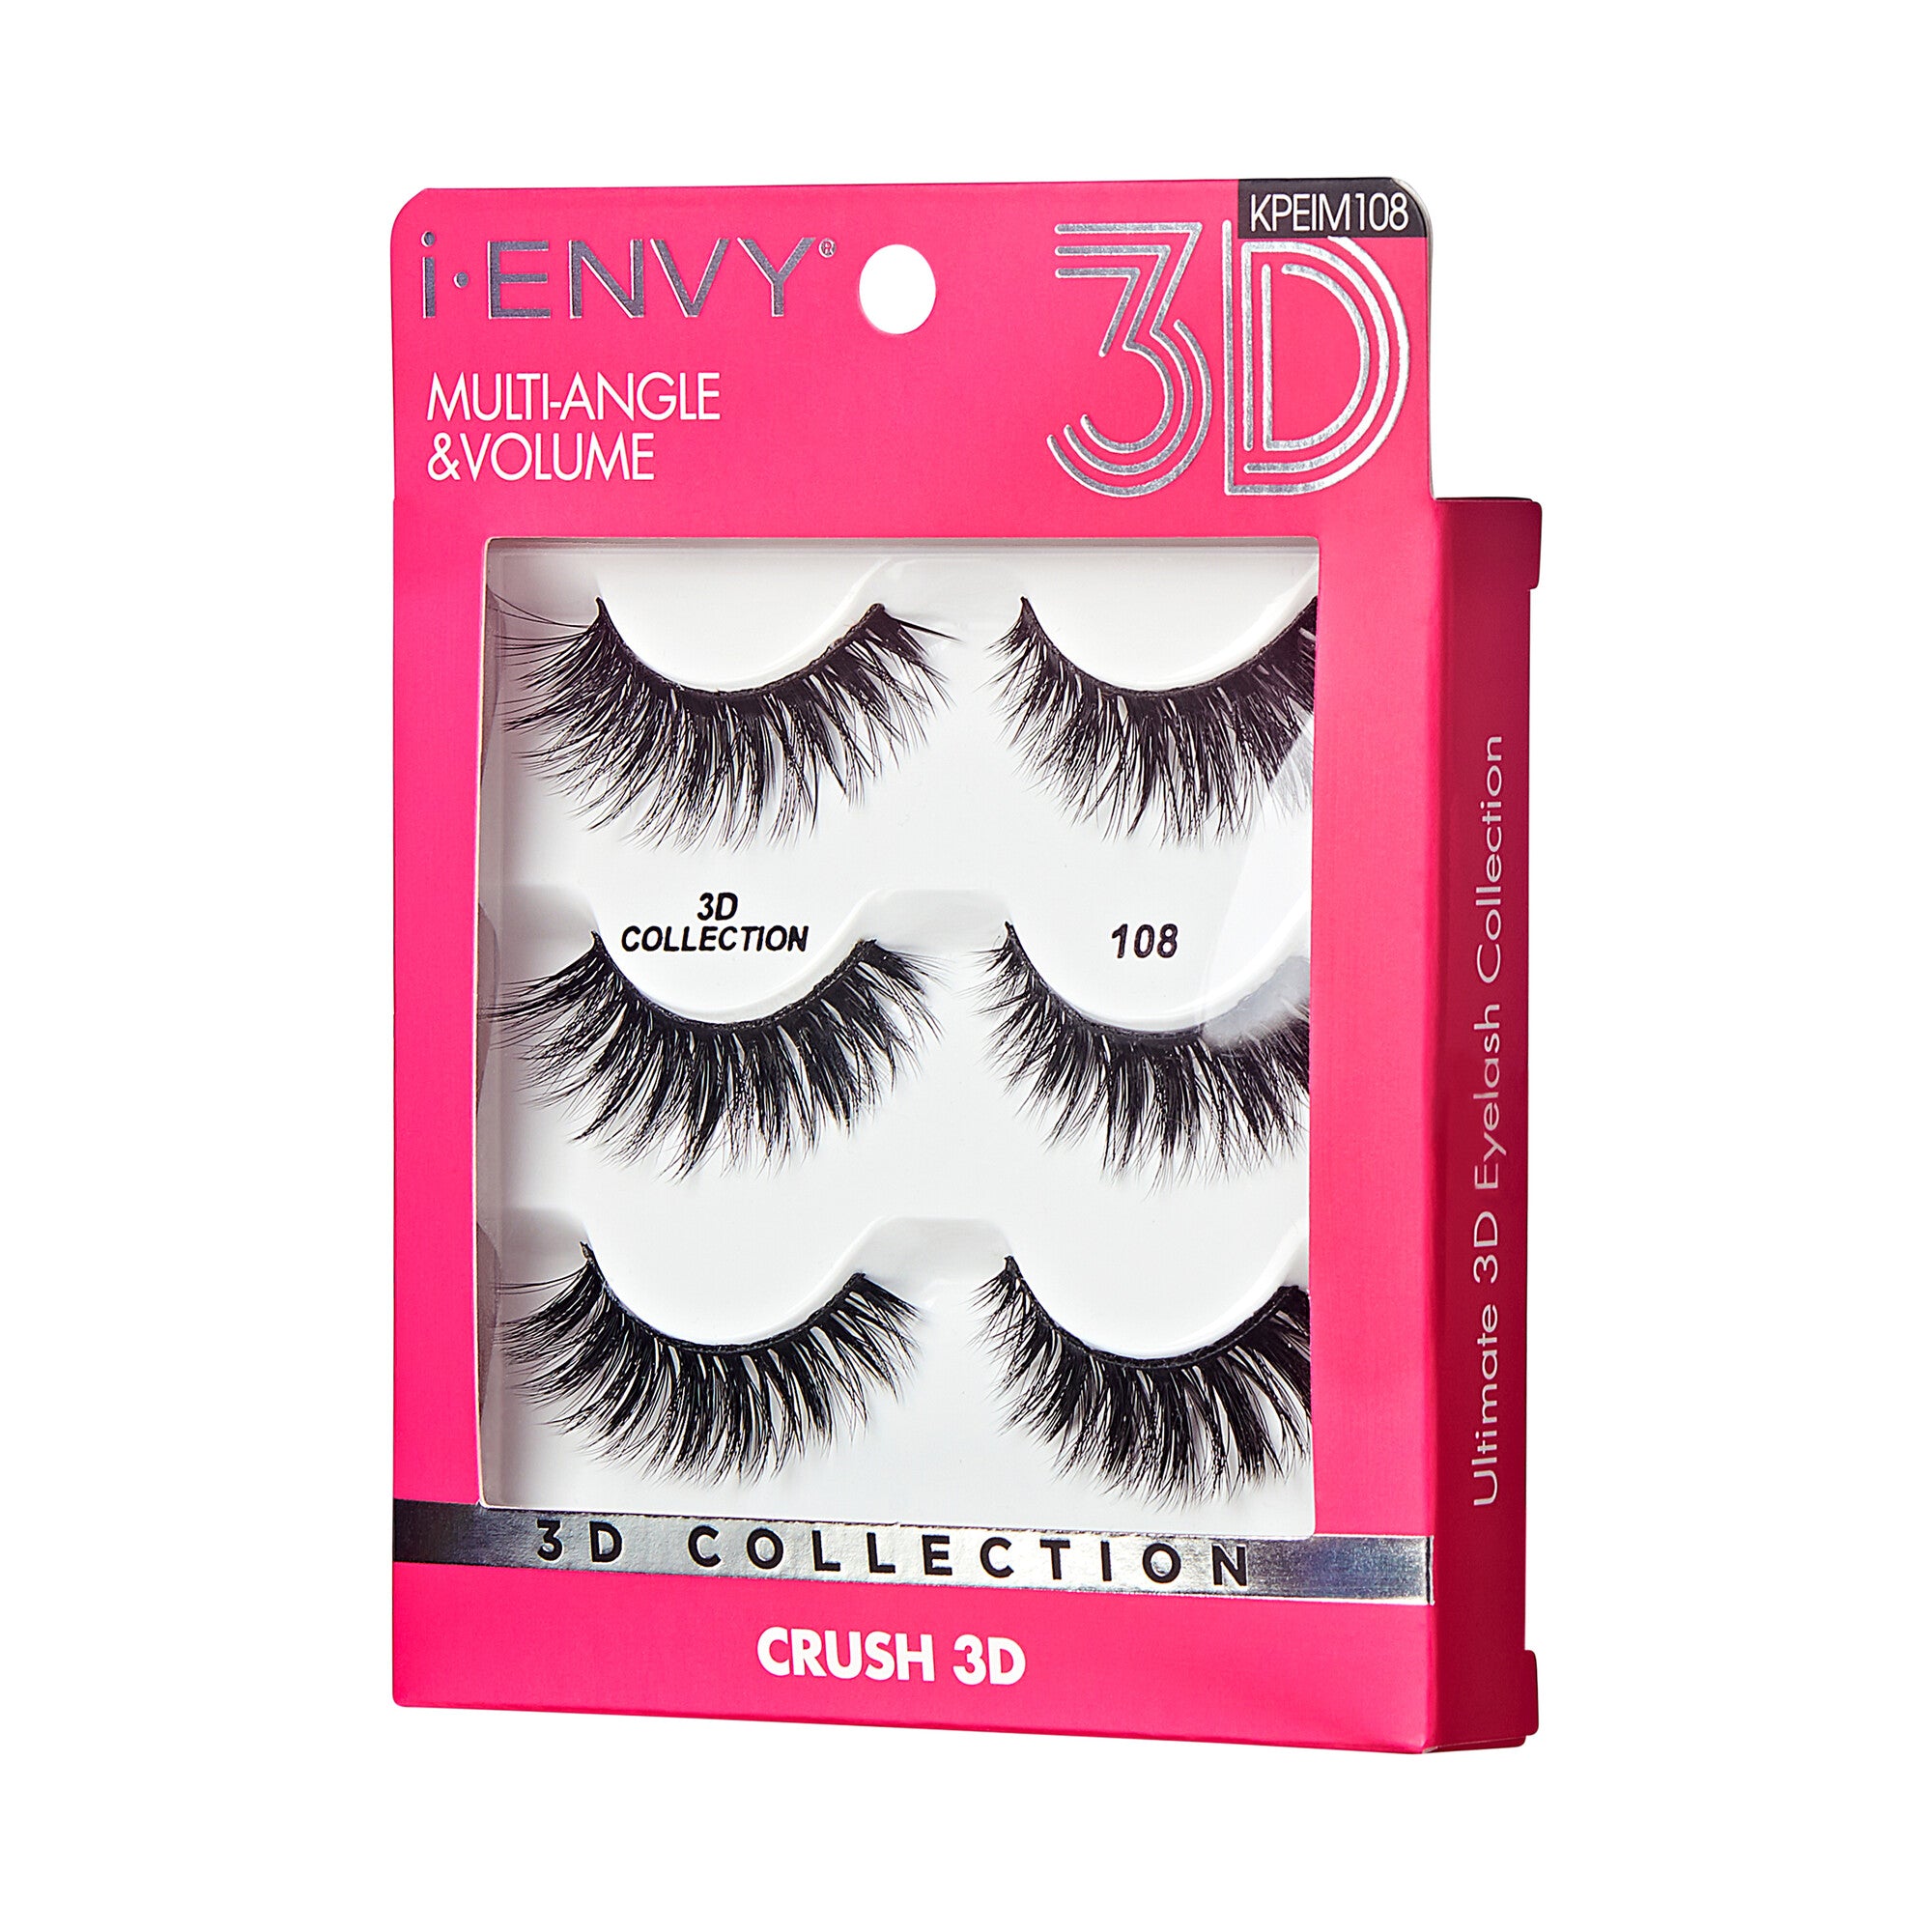 I.Envy By Kiss 3D Lashes Multi Pack Multiangle & Volume Collection-108 (KPEIM108)